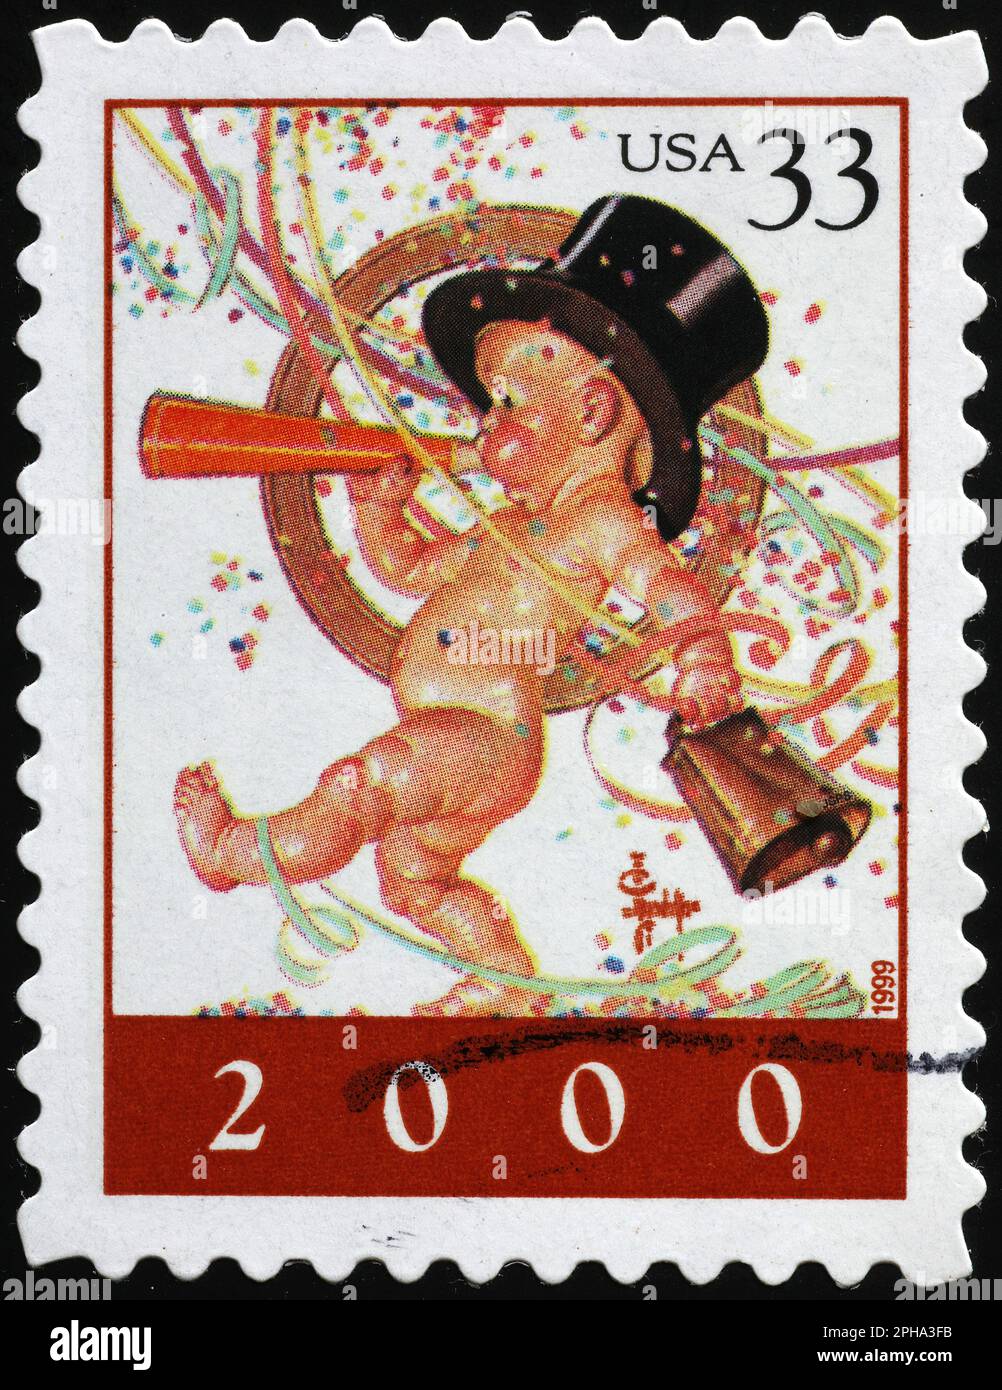 Depiction of the year 2000 as a child in a party on stamp Stock Photo